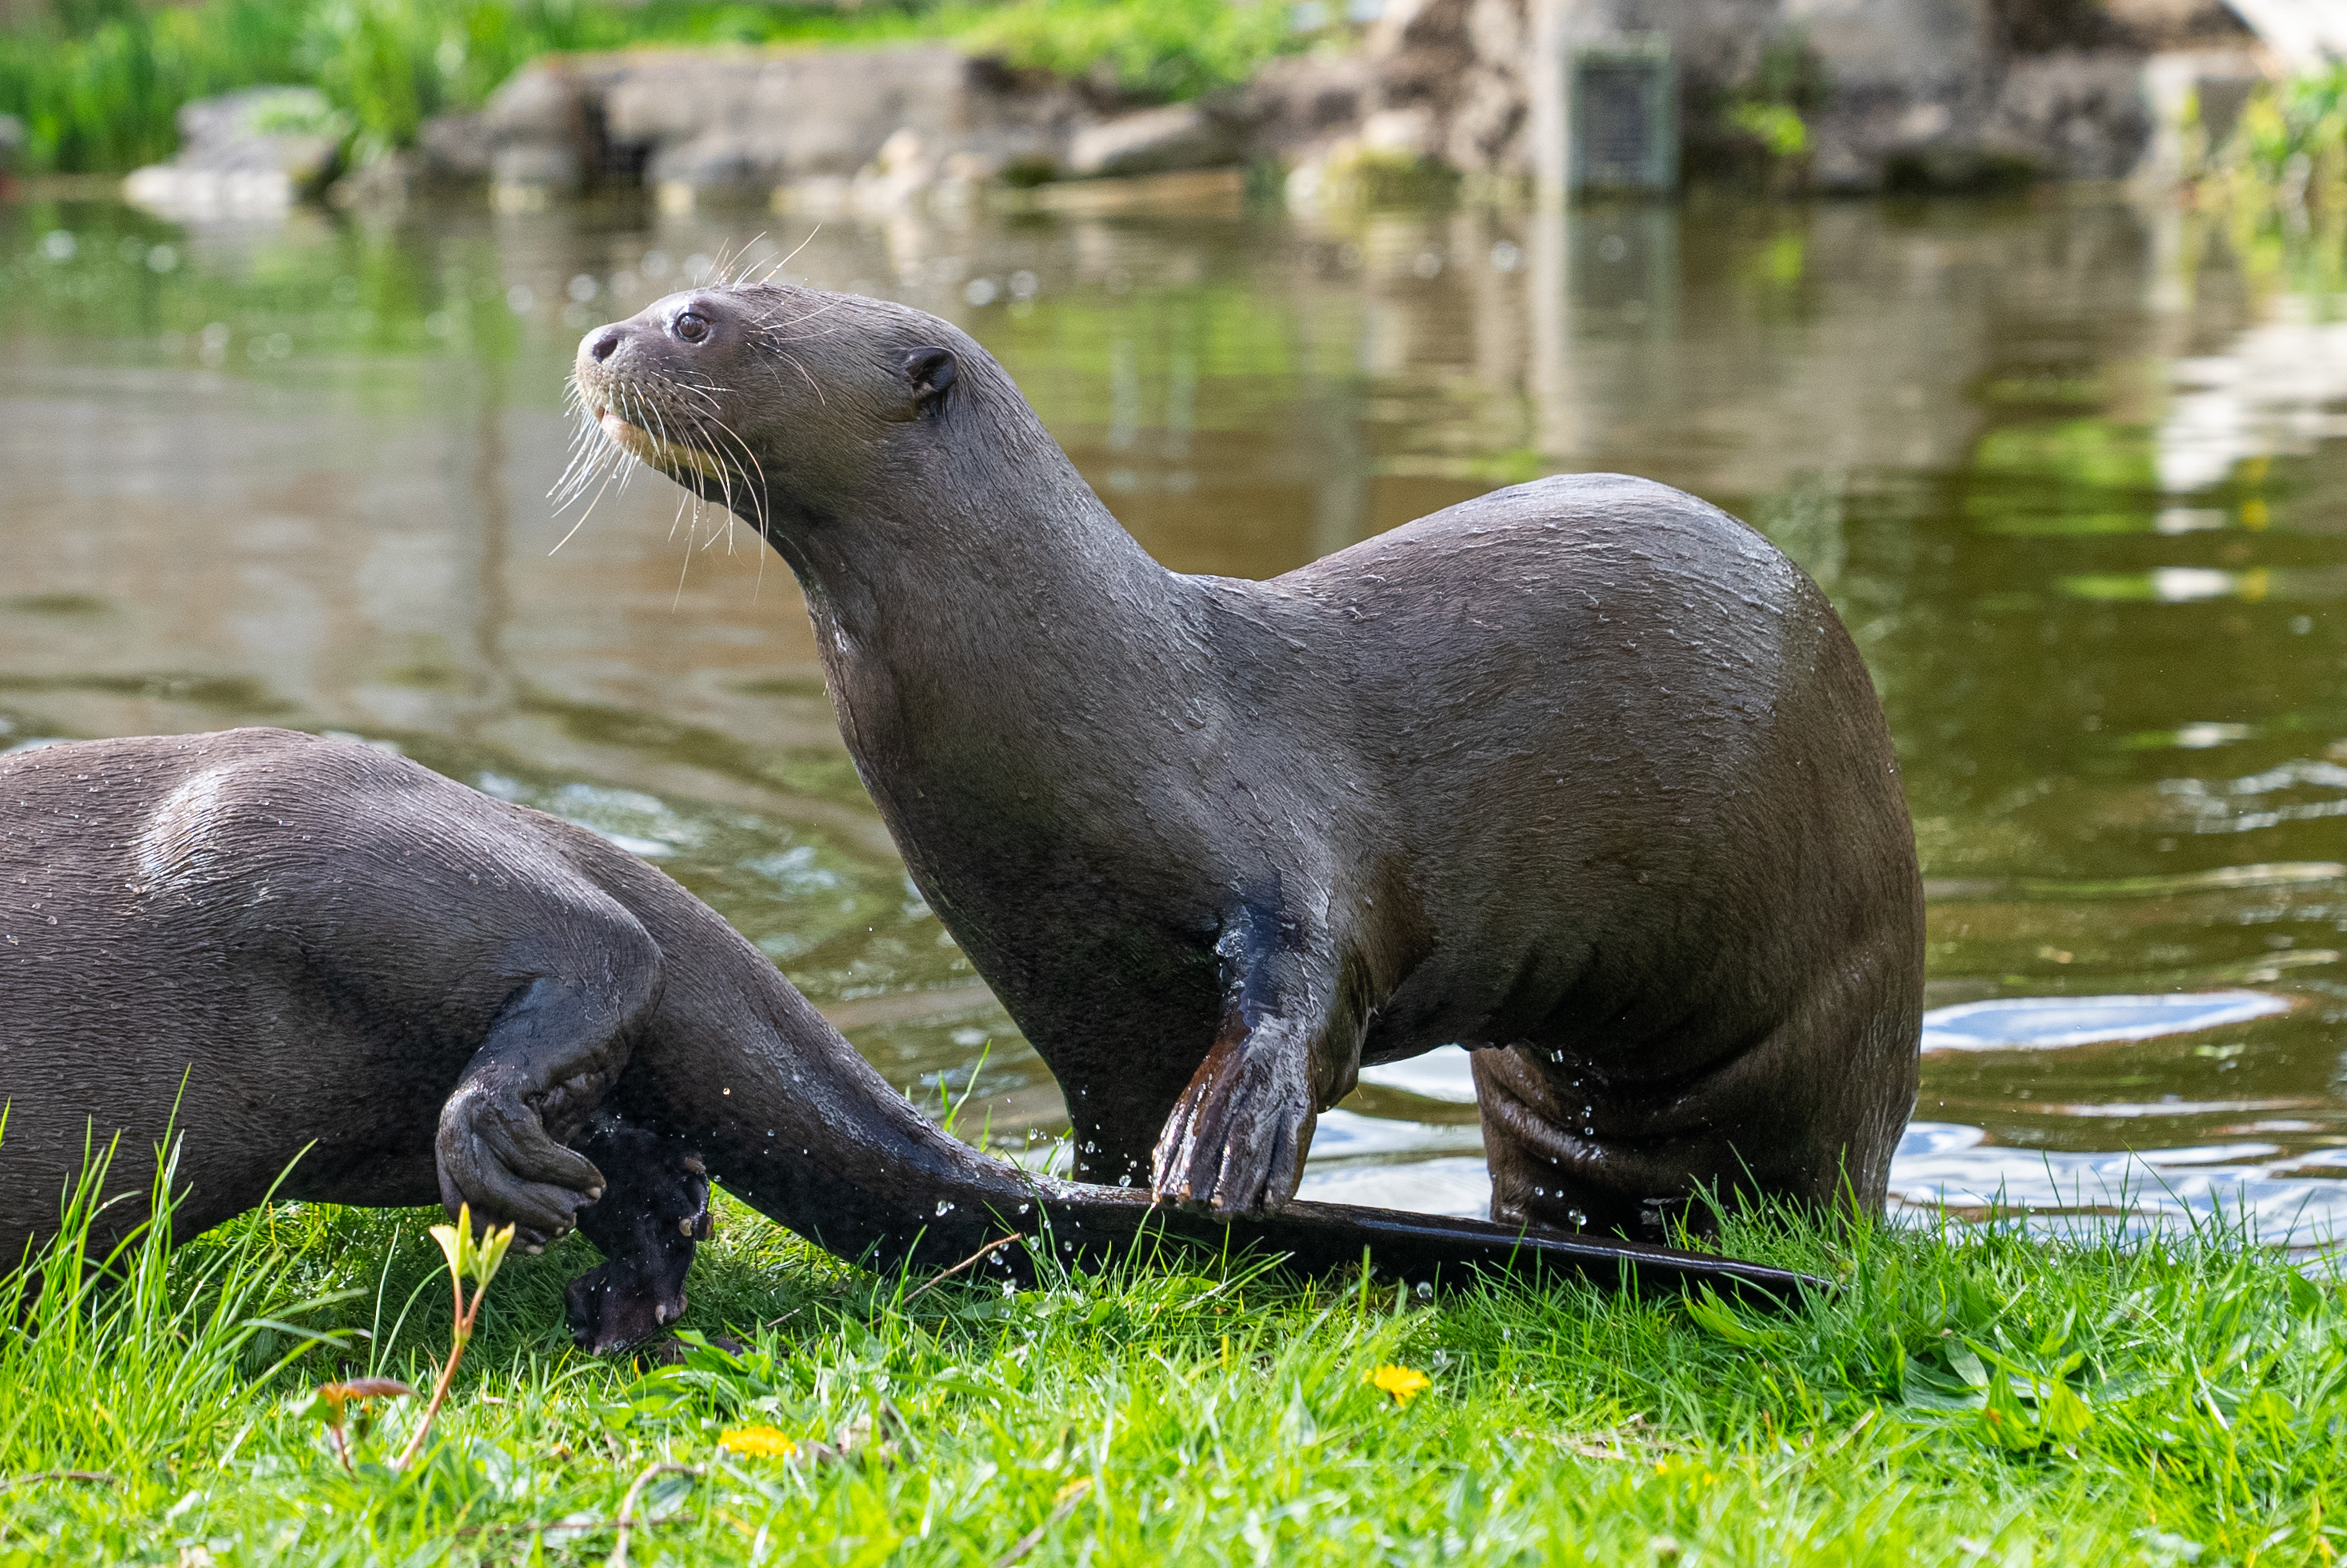 An undated photo shows two giant otters at Chester Zoo, UK, where they 